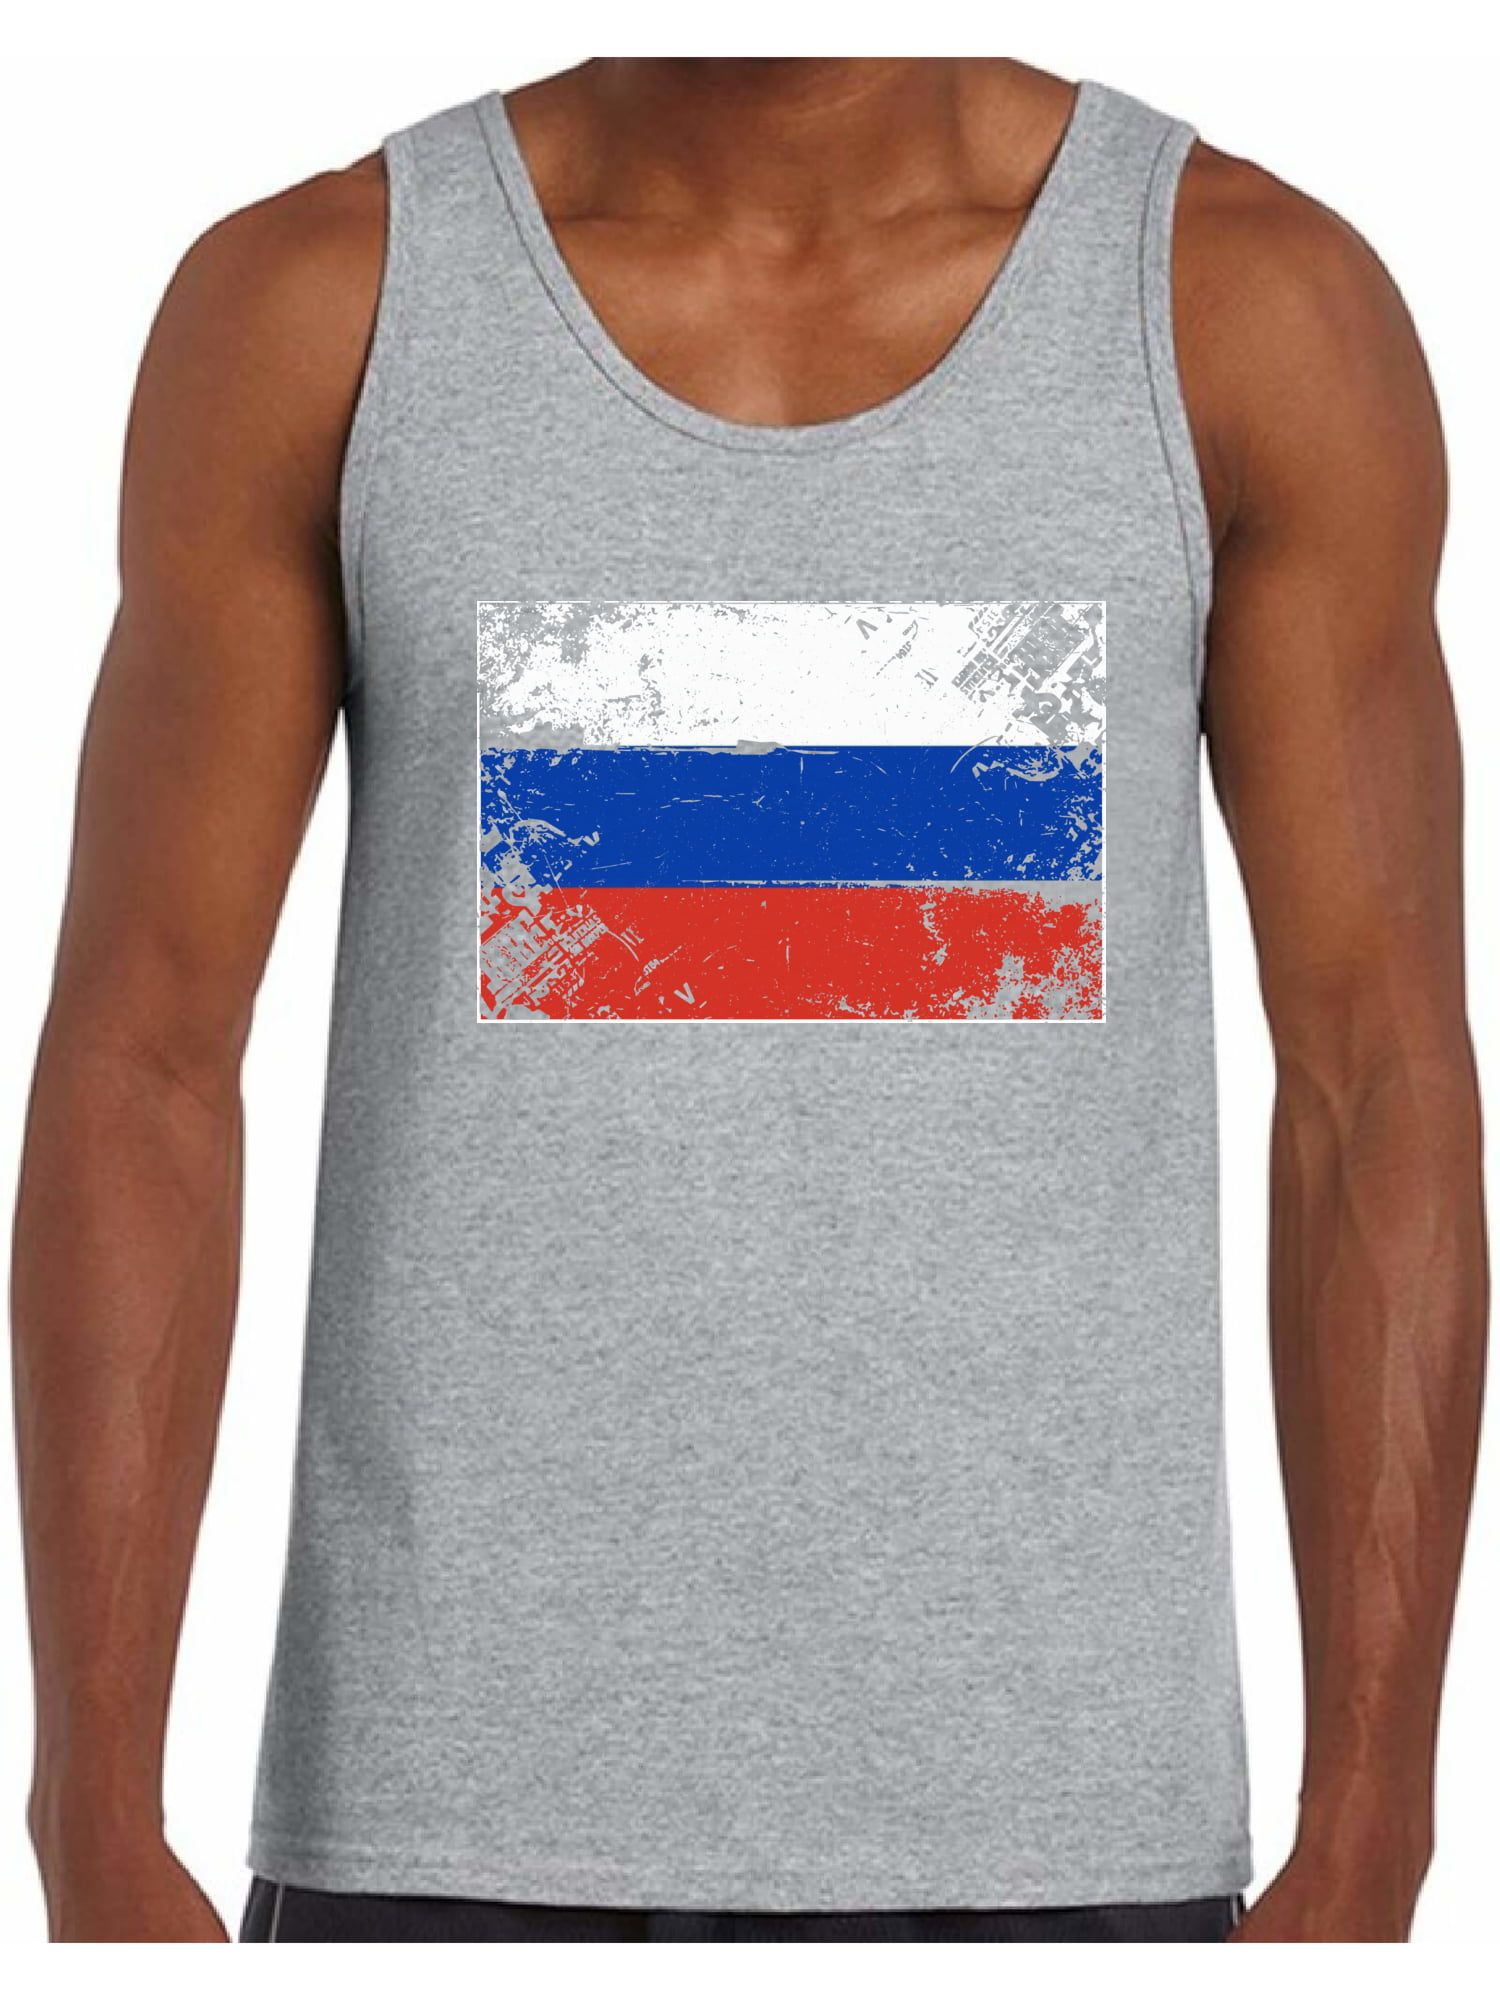 Awkward Styles - Awkward Styles Russia Flag Tank Top for Men Russian ...